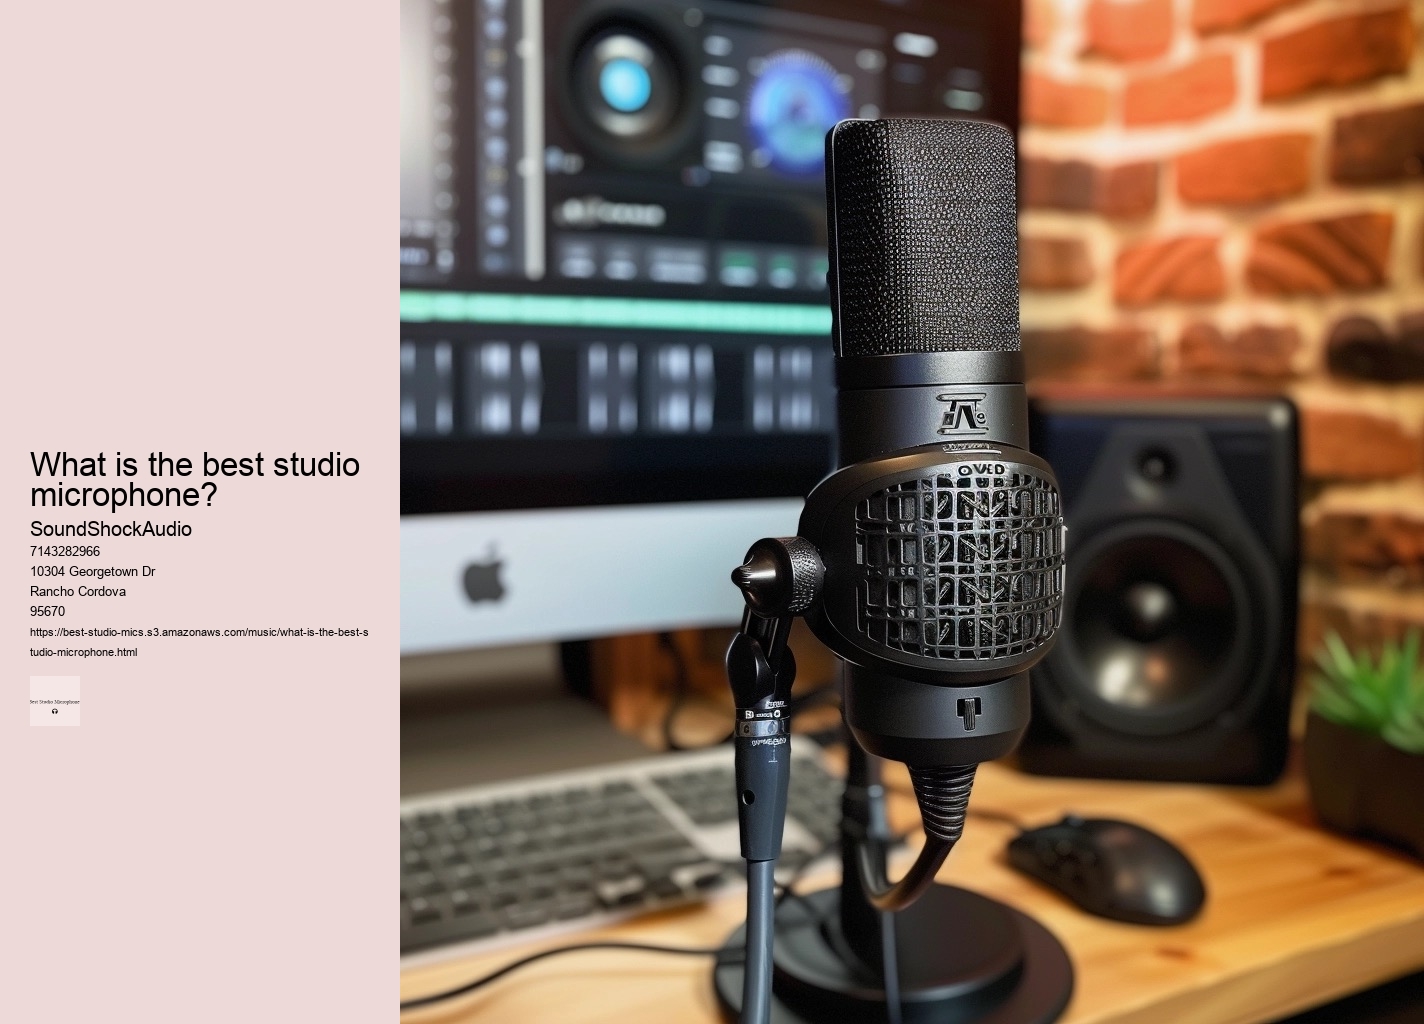 what is the best studio microphone?